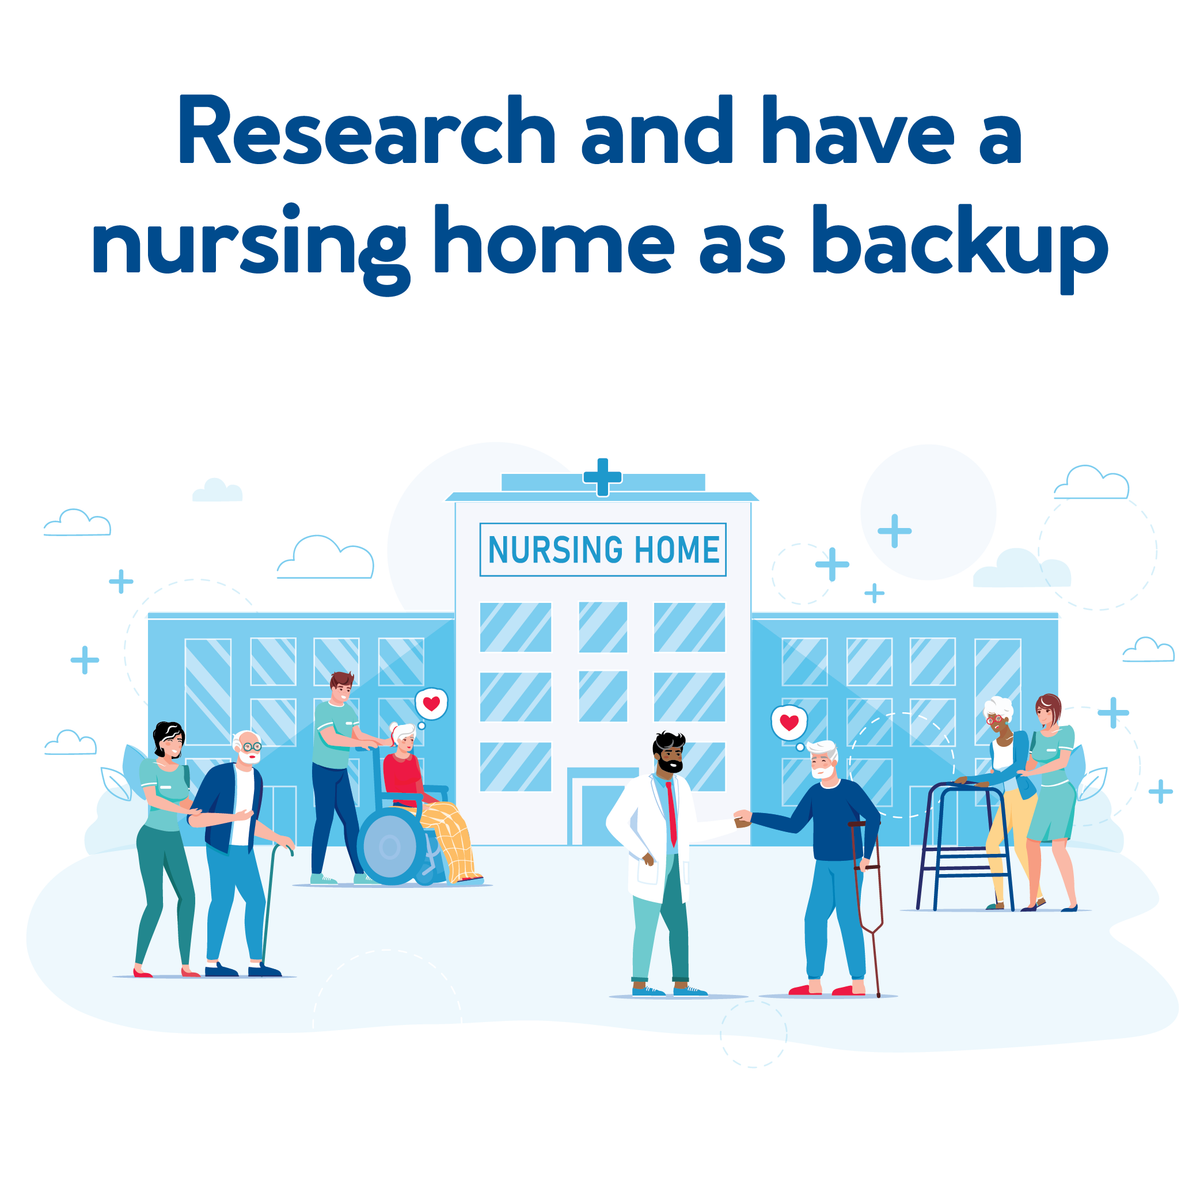 Various cartoon seniors around a nursing home. Text, “Research and have a nursing home as backup”